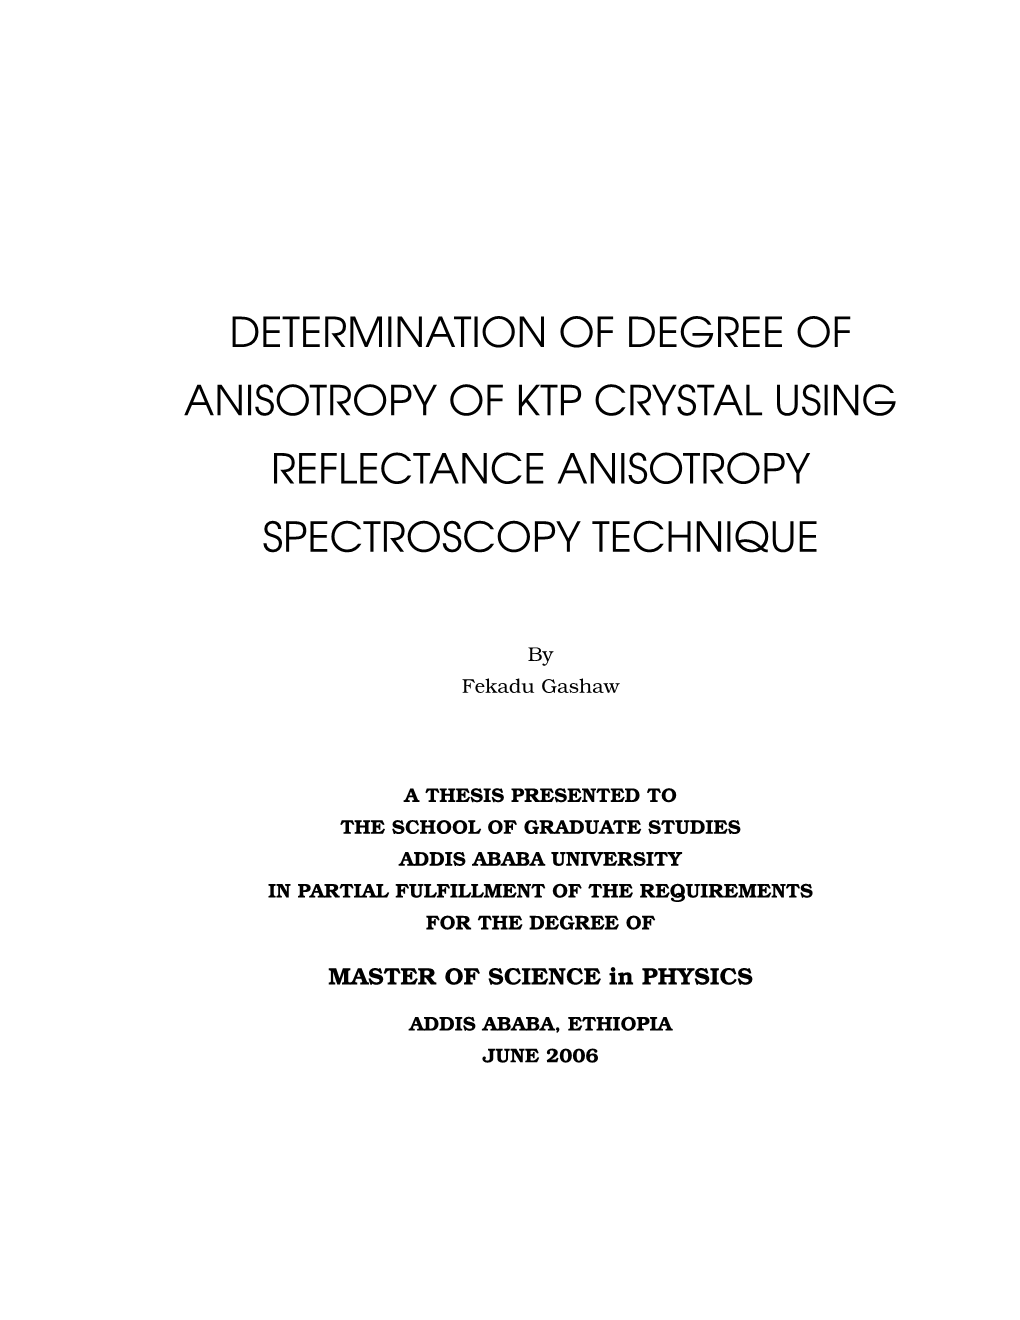 Determination of Degree of Anisotropy of Ktp Crystal Using Reflectance Anisotropy Spectroscopy Technique